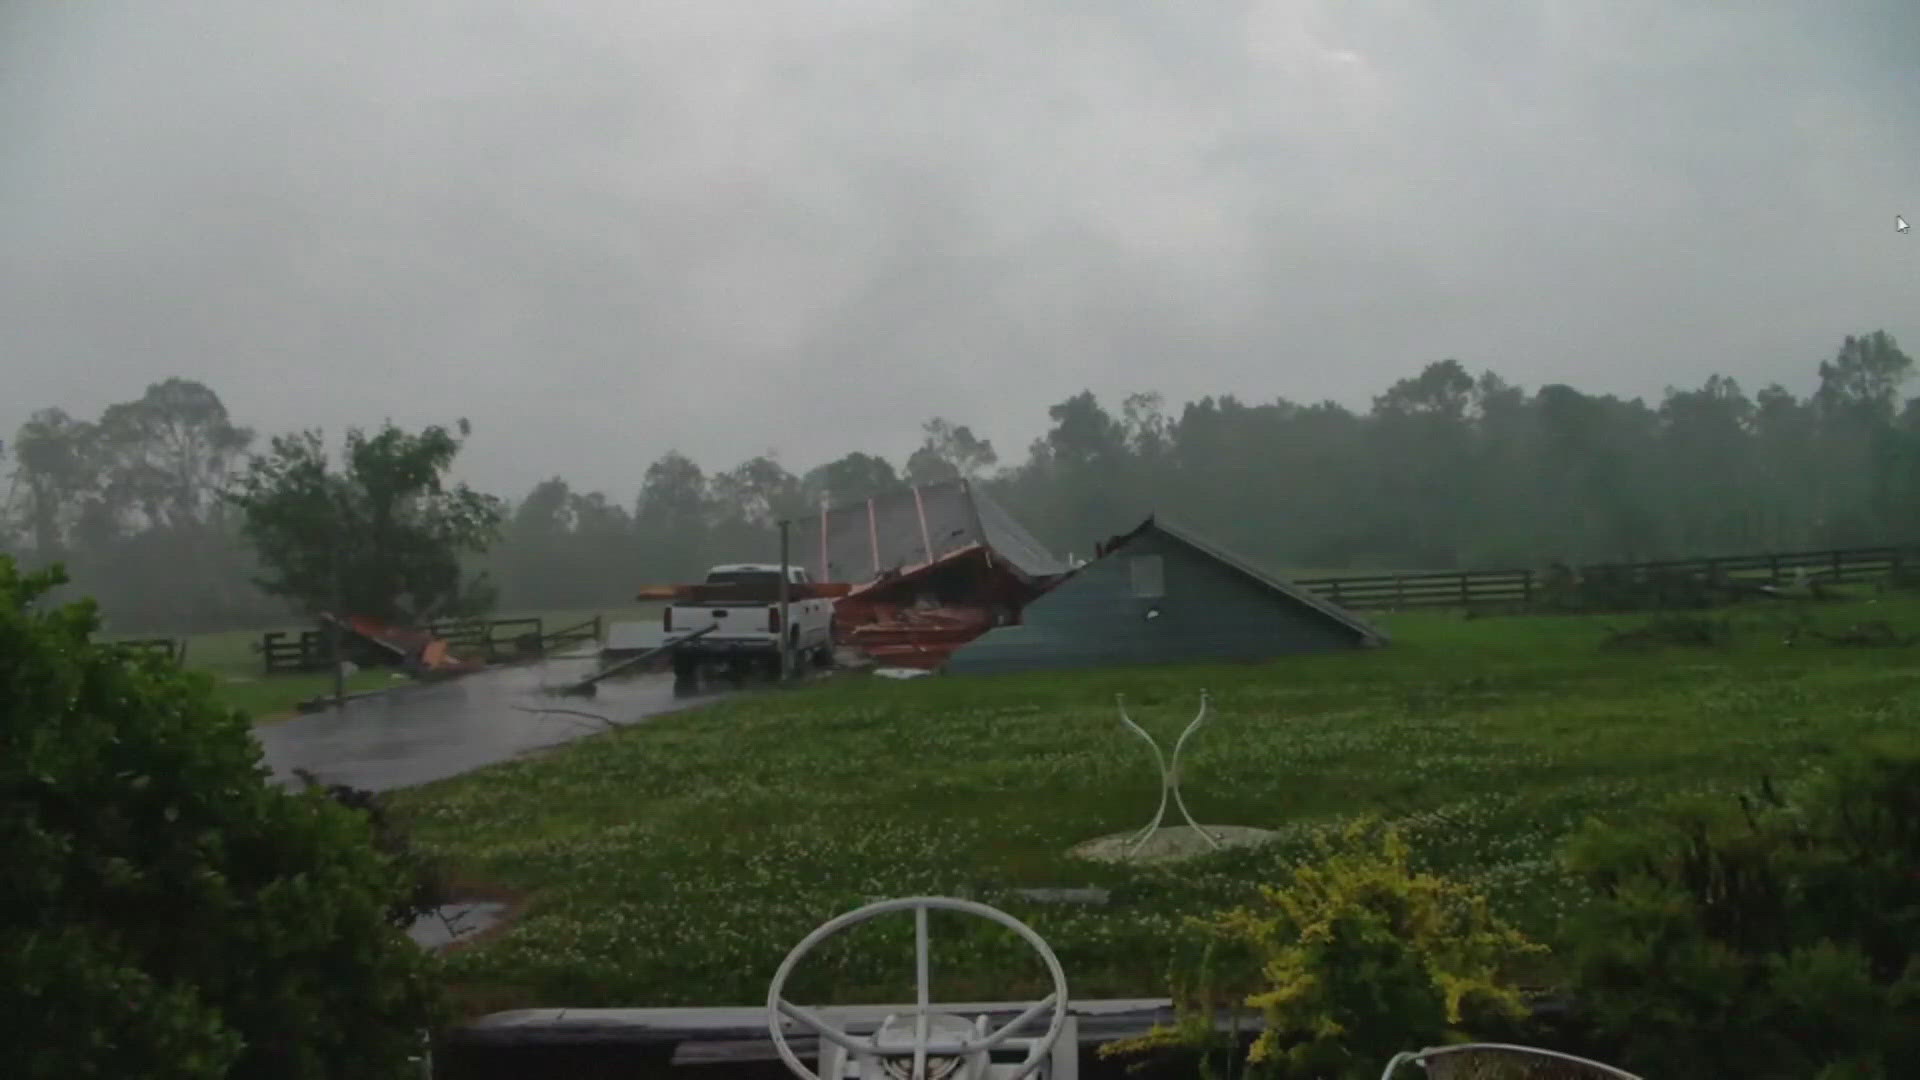 A tornado in Tennessee damaged homes, injured people, toppled power lines and trees.